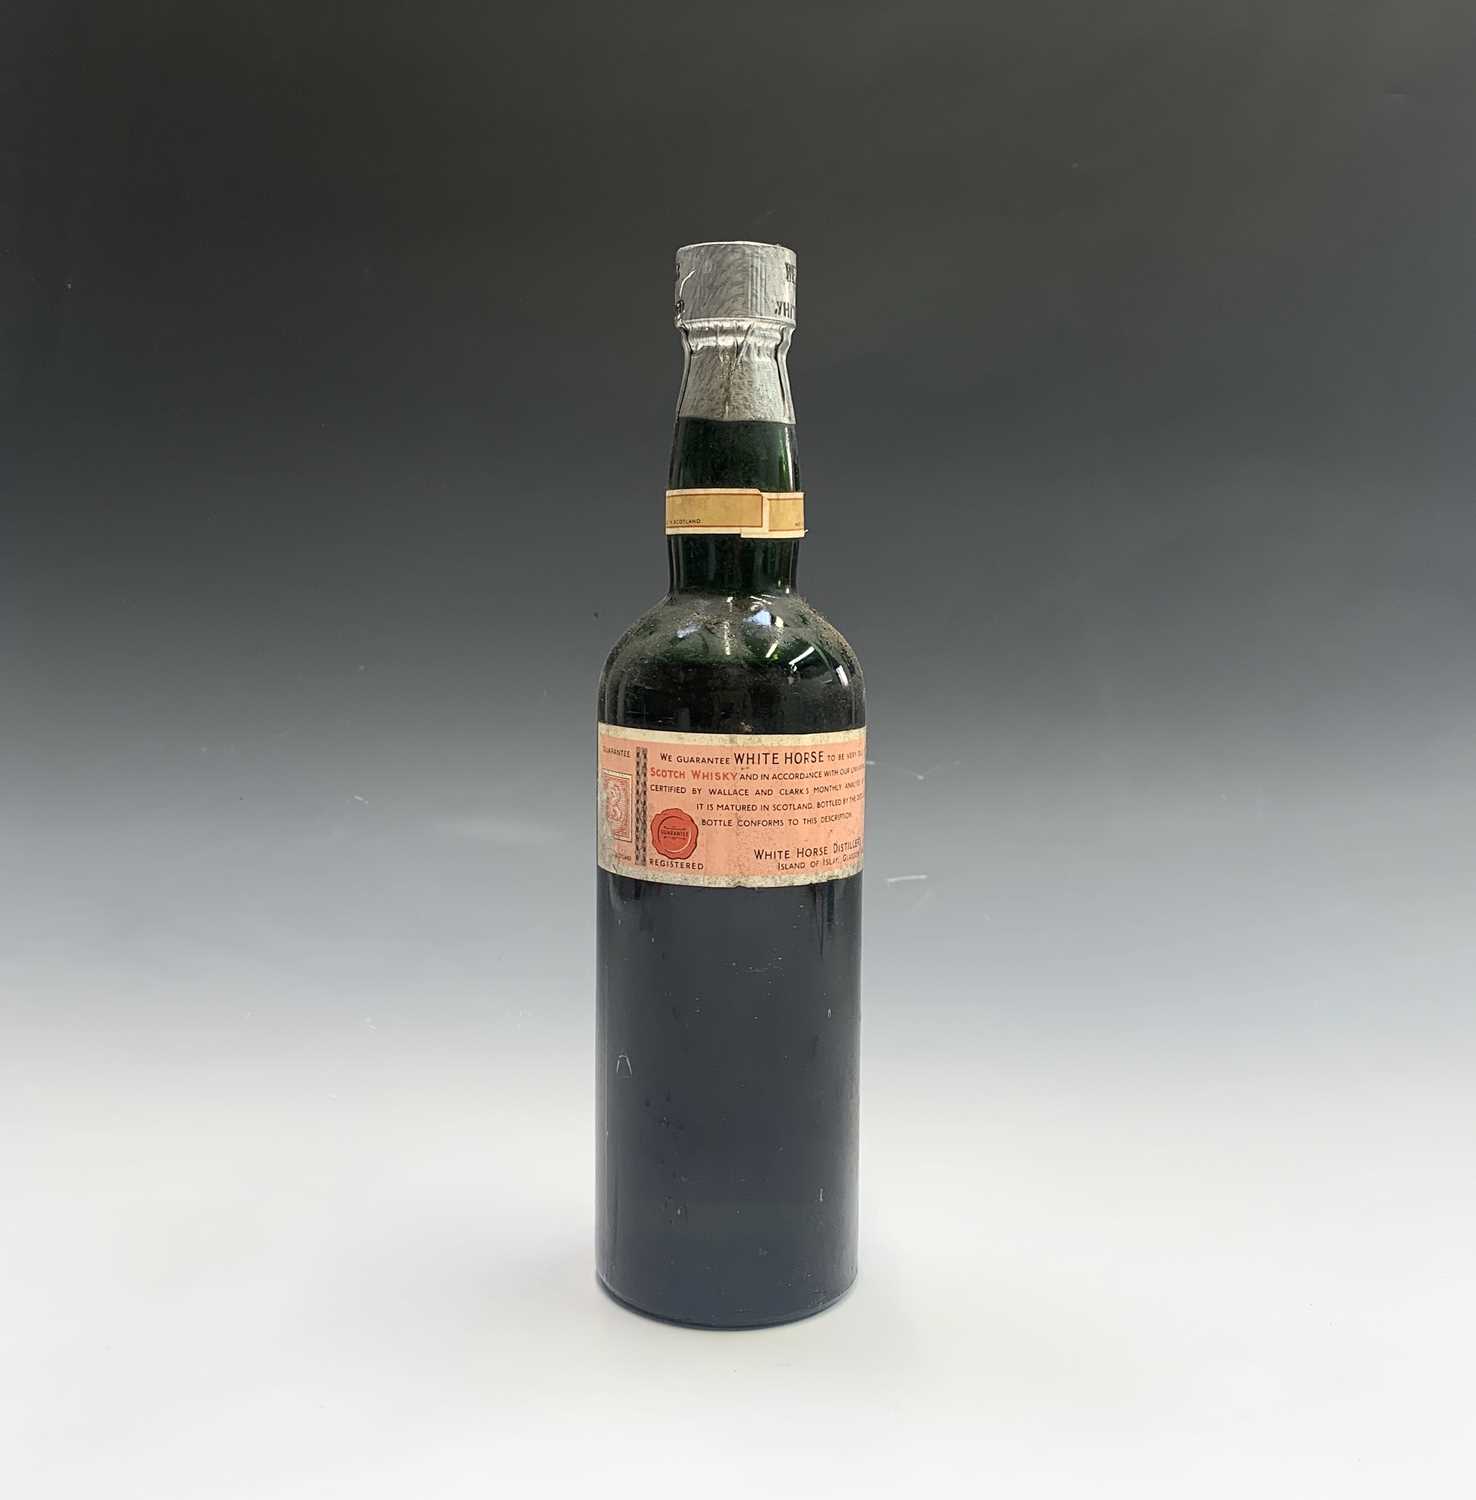 Lagavulin Distillery, a bottle of White horse Cellar Blend Scotch Whisky, bottled in 1957, No - Image 2 of 2